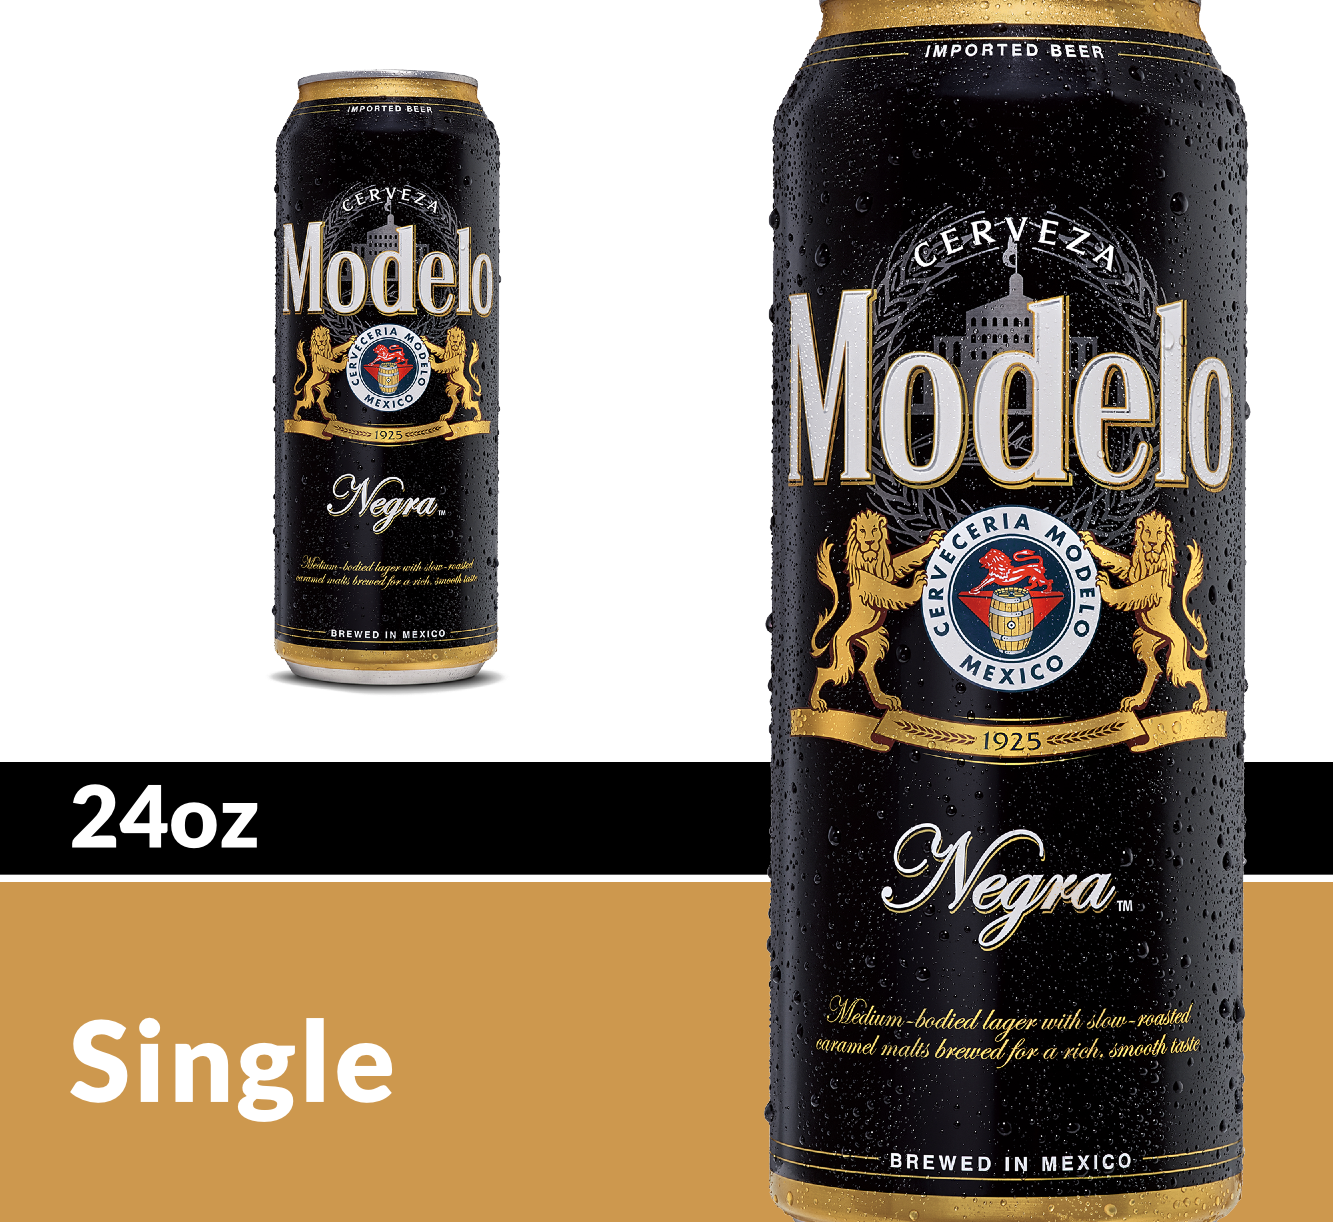 slide 9 of 9, Modelo Negra Amber Lager Mexican Import Beer, 24 fl oz Can, 5.4% ABV, 24 oz